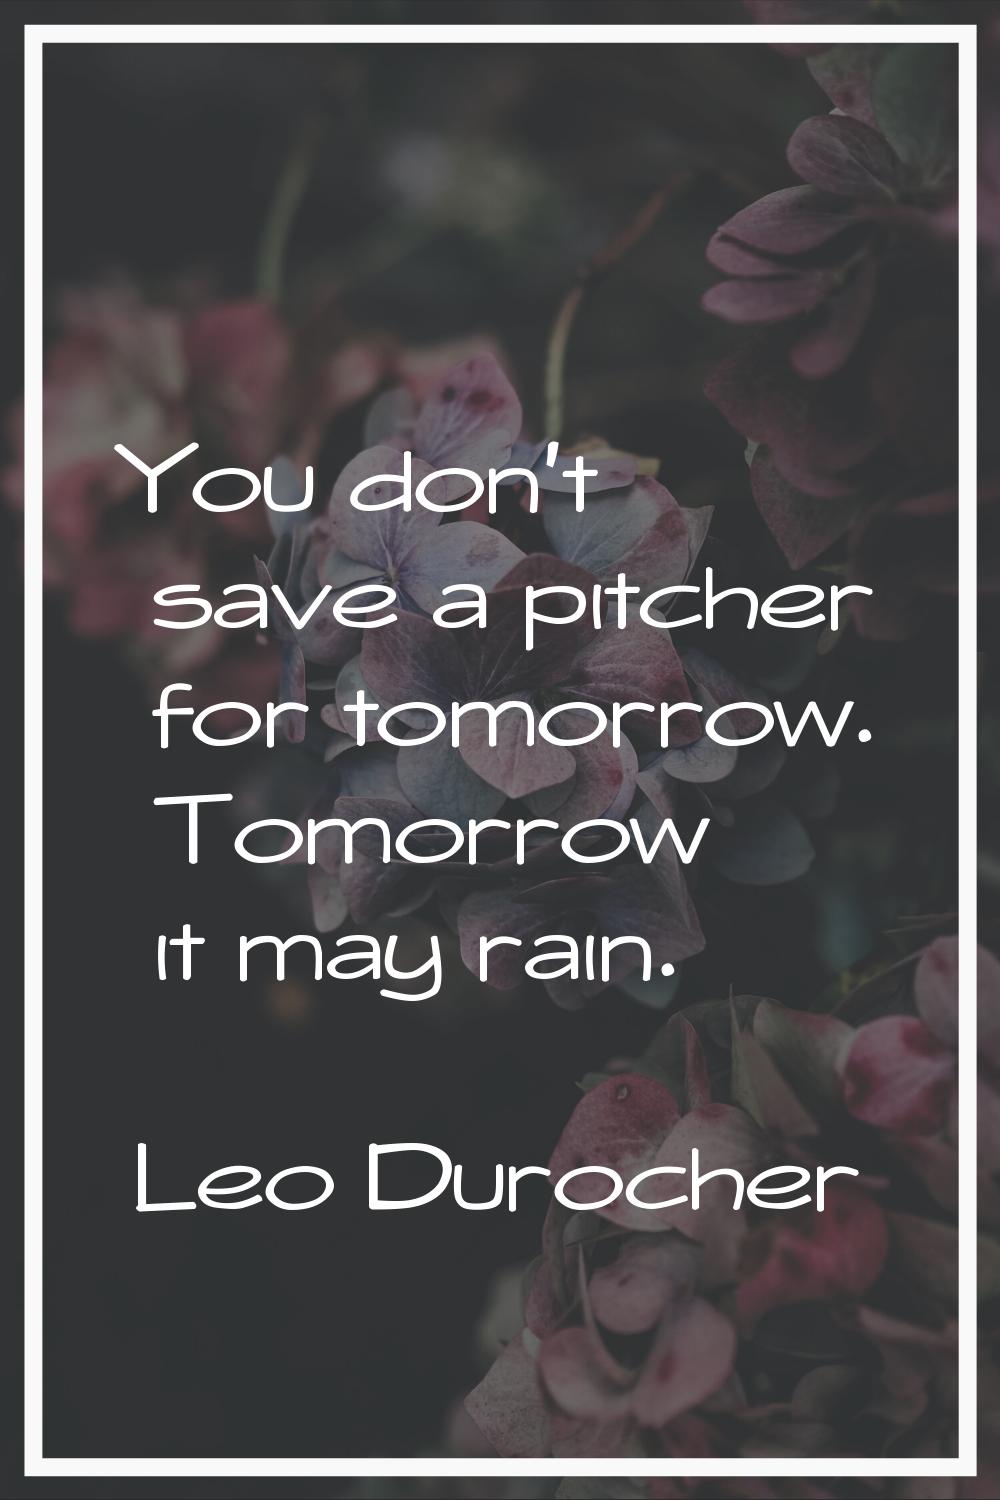 You don't save a pitcher for tomorrow. Tomorrow it may rain.